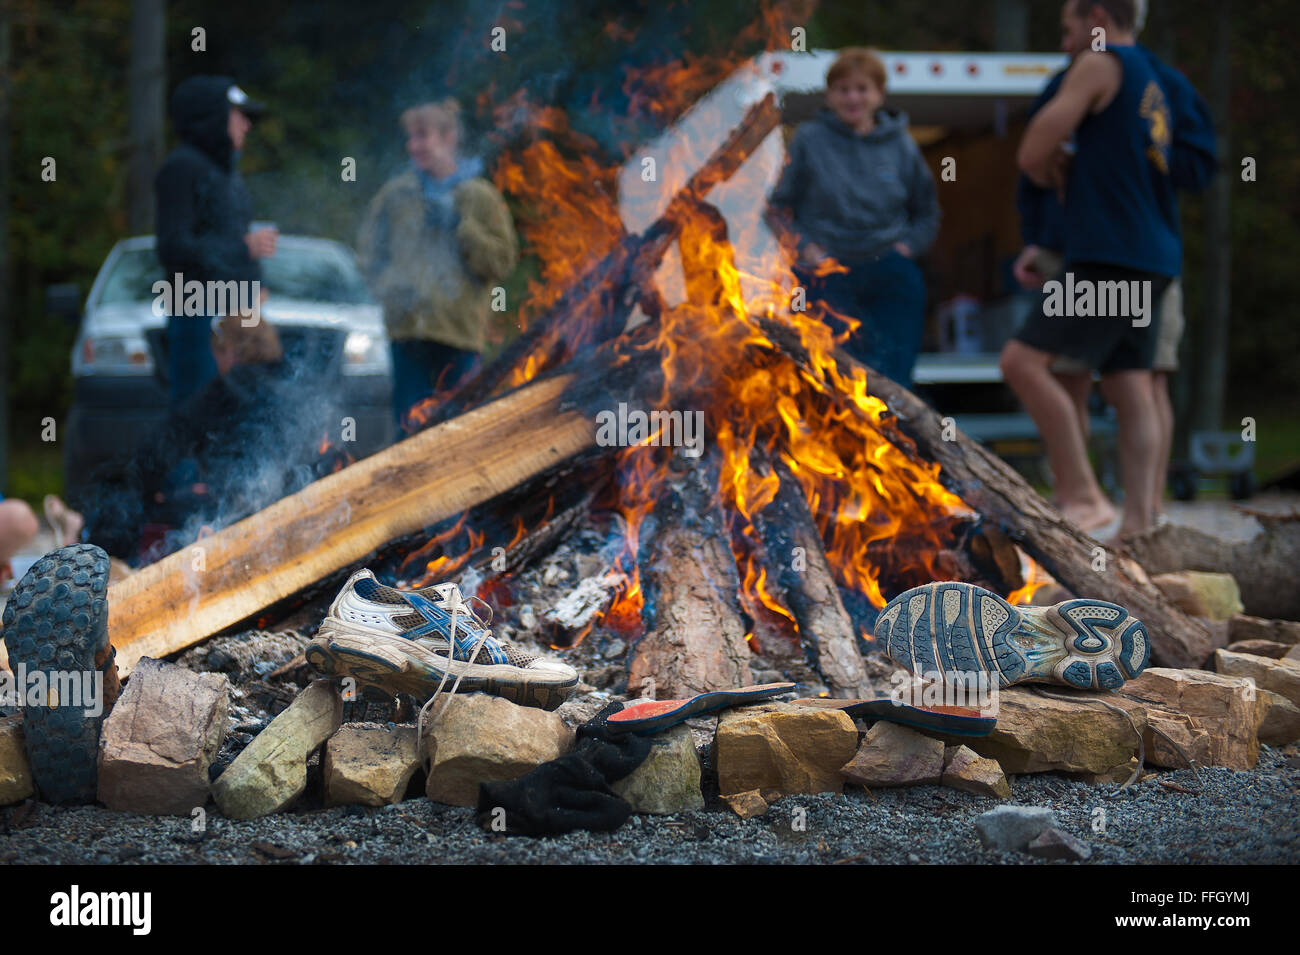 In an attempt to warm up and dry their gear, members placed their soggy shoes by the camp fire after soaking them in a race with cold rapids and muddy trails. Stock Photo